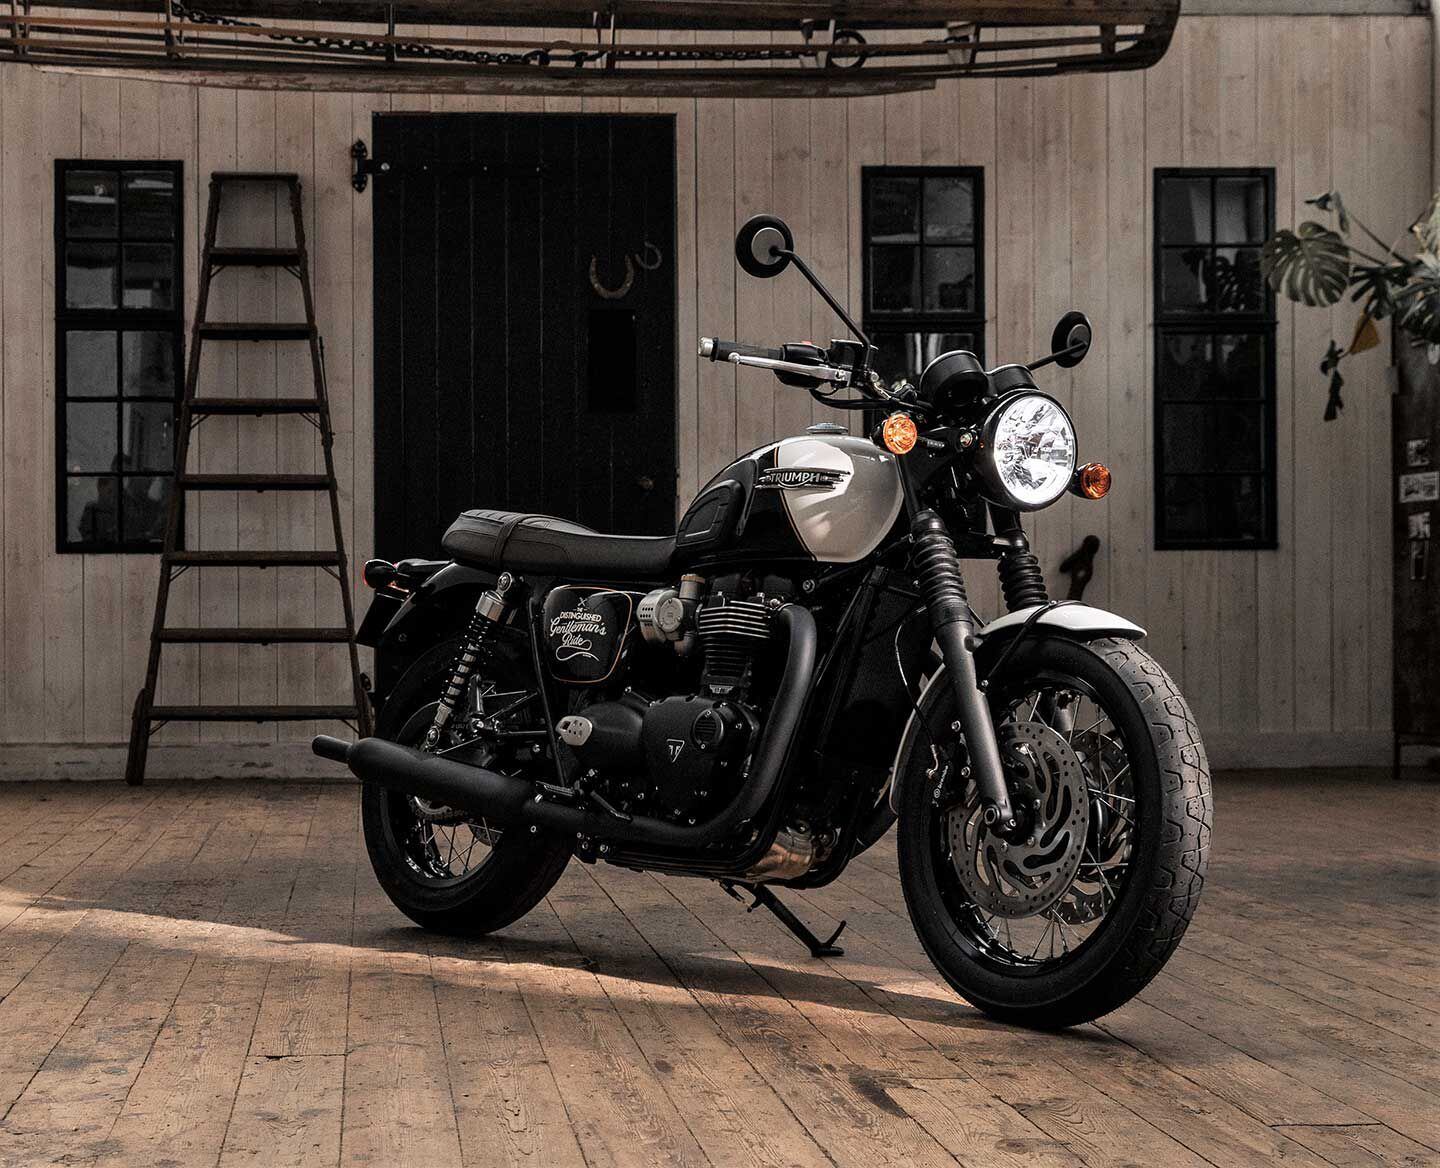 In the US, the T120 Black DGR edition will retail for $13,495 and will be considered a 2024 model.